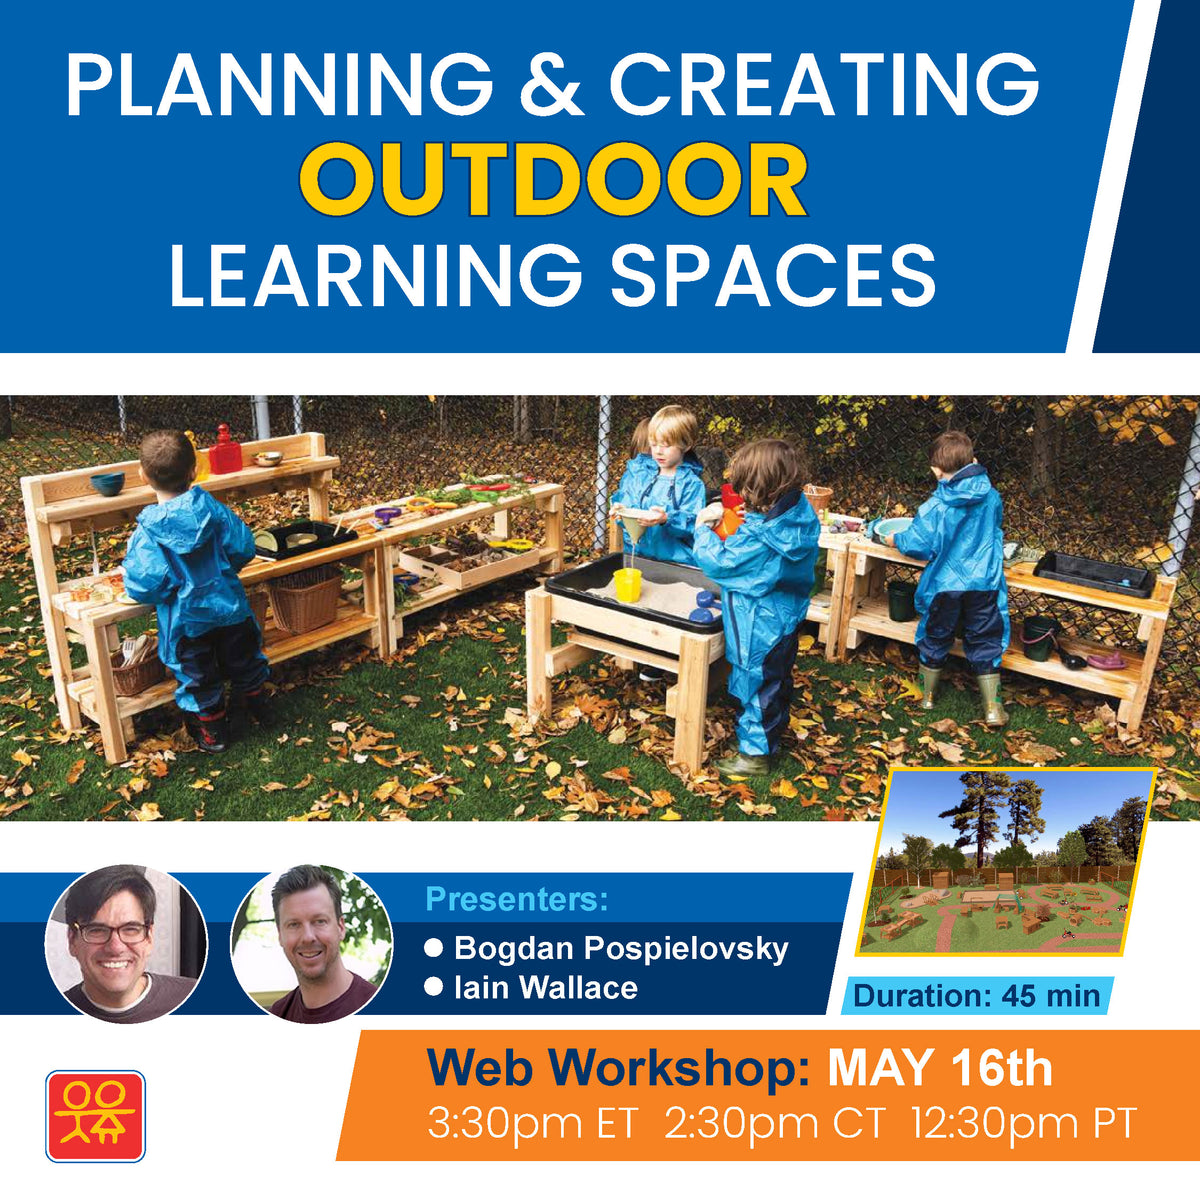 Planning and Creating Outdoor Learning Spaces-03.jpg__PID:23d1c1ac-7cd6-4dcd-95bc-5db272c9e242